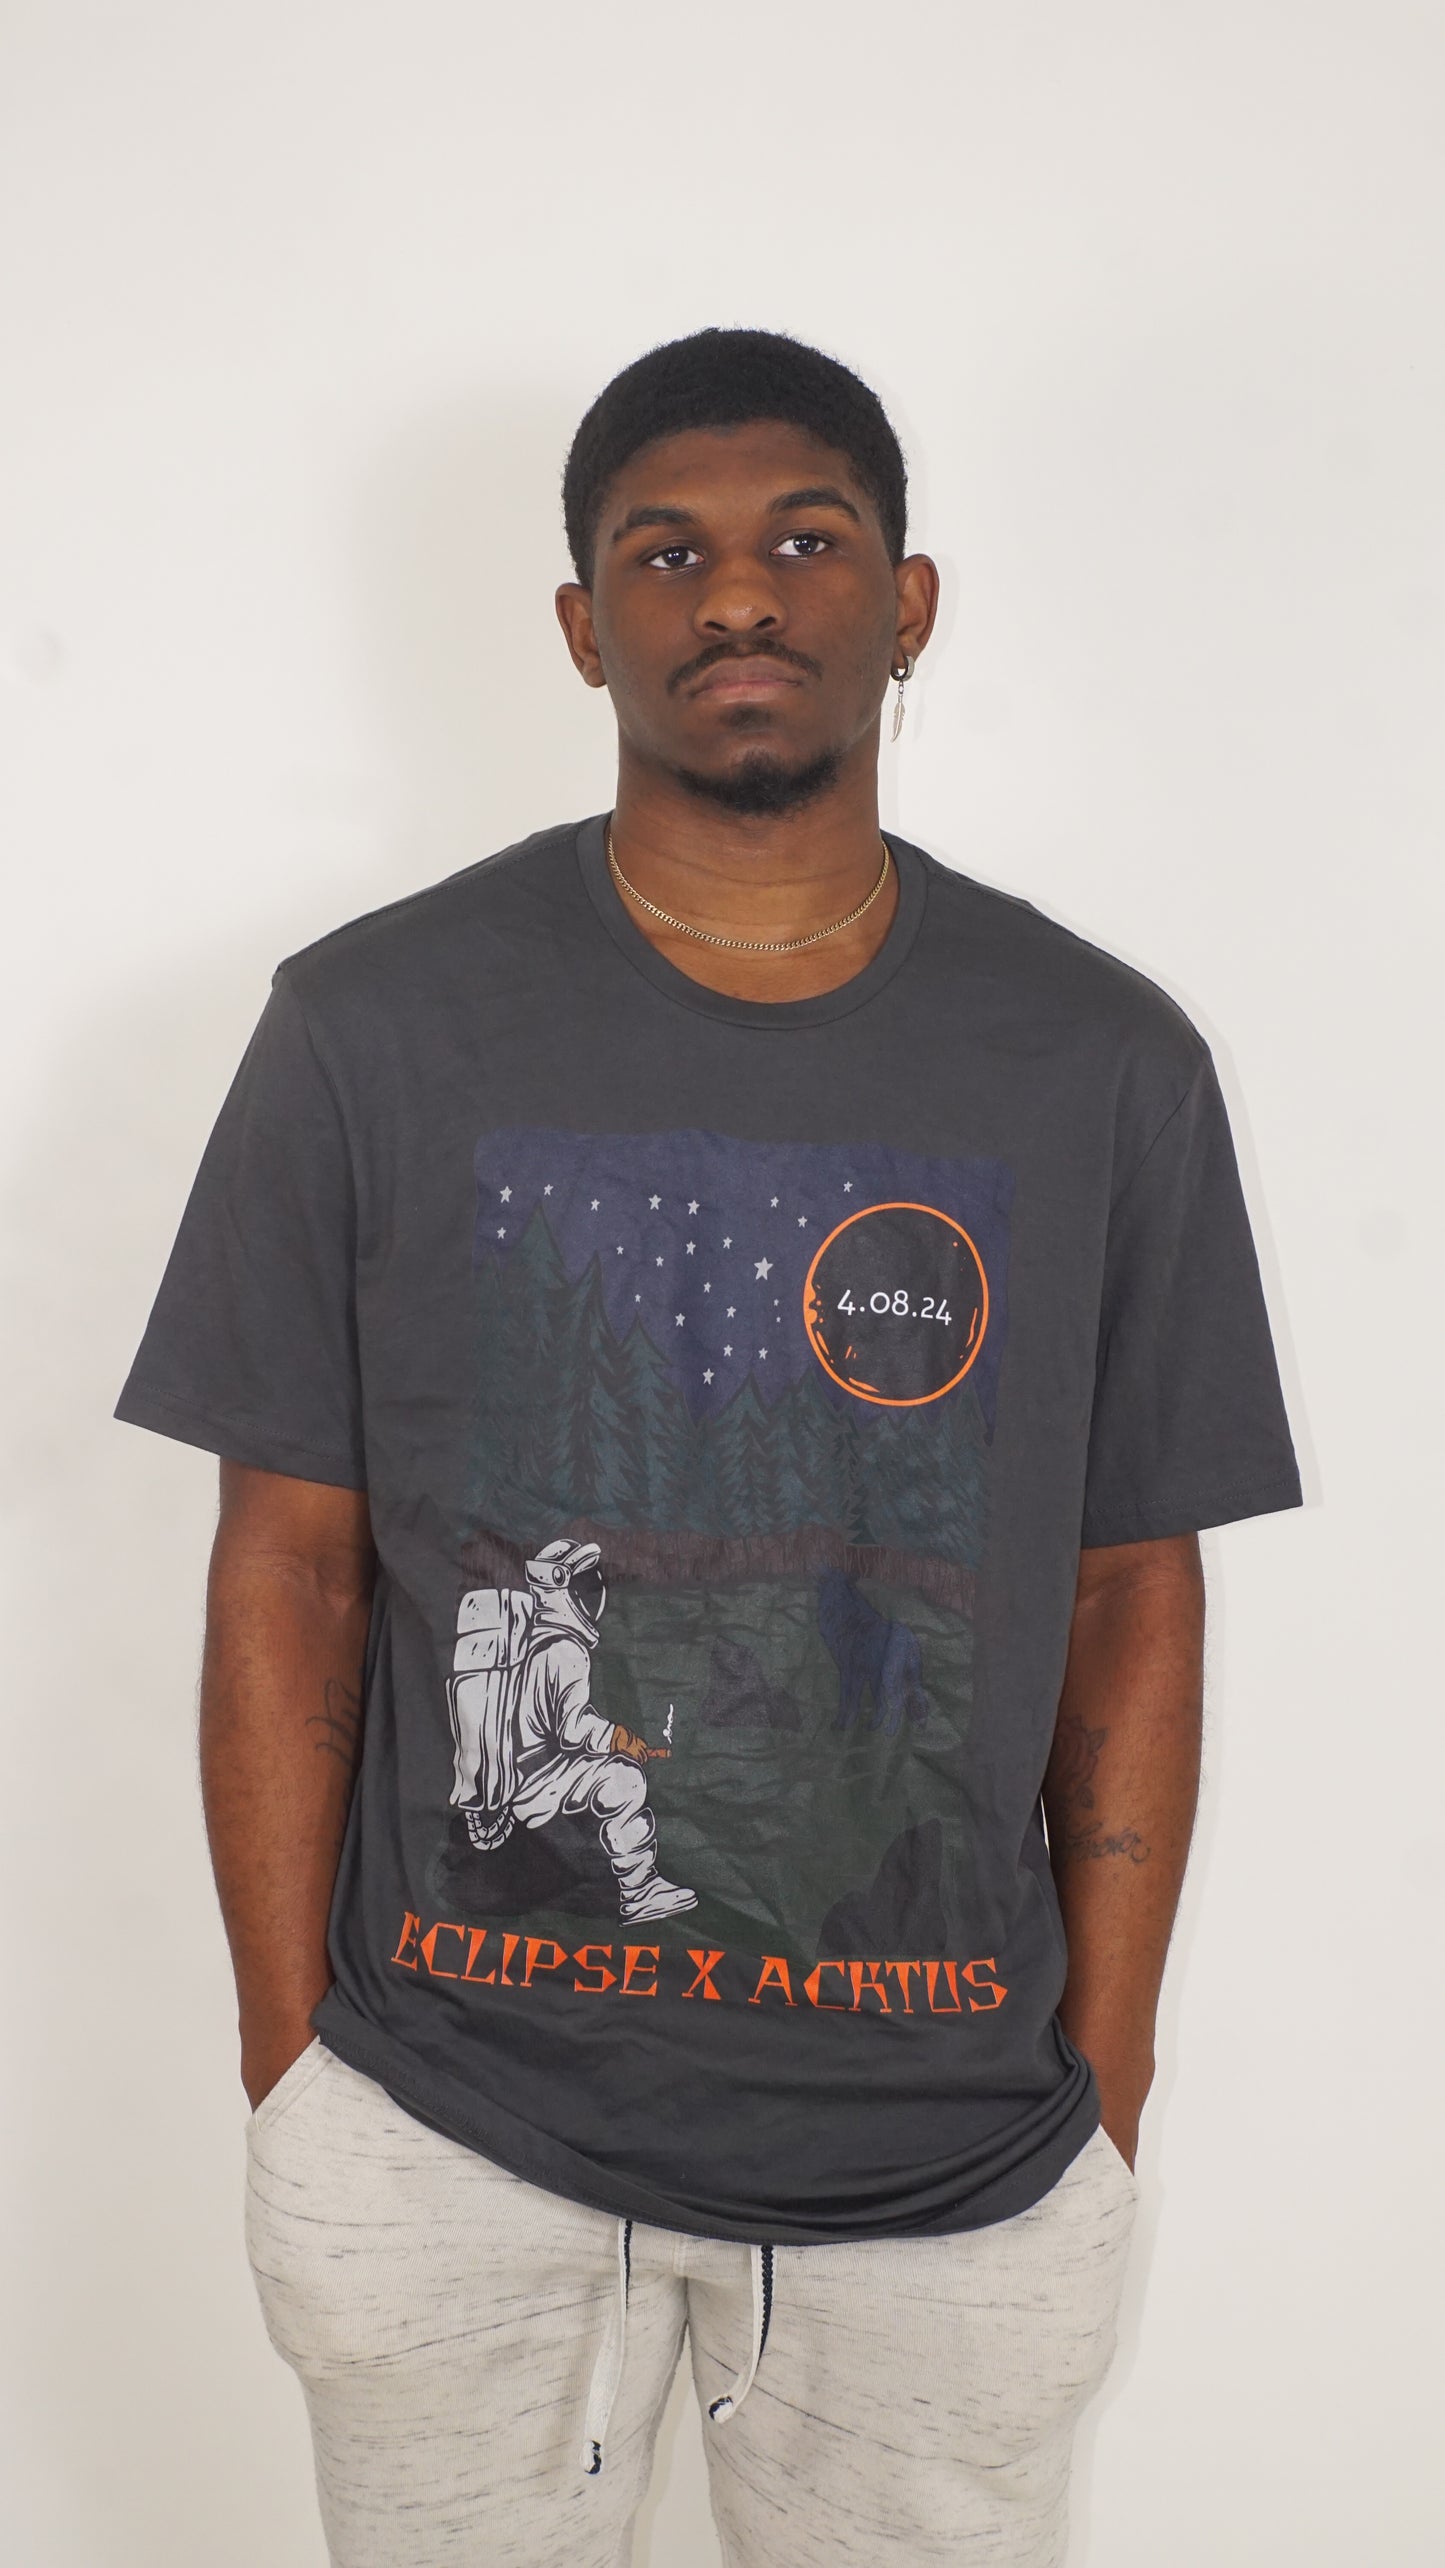 Spring Eclipse '04 Fit Tee